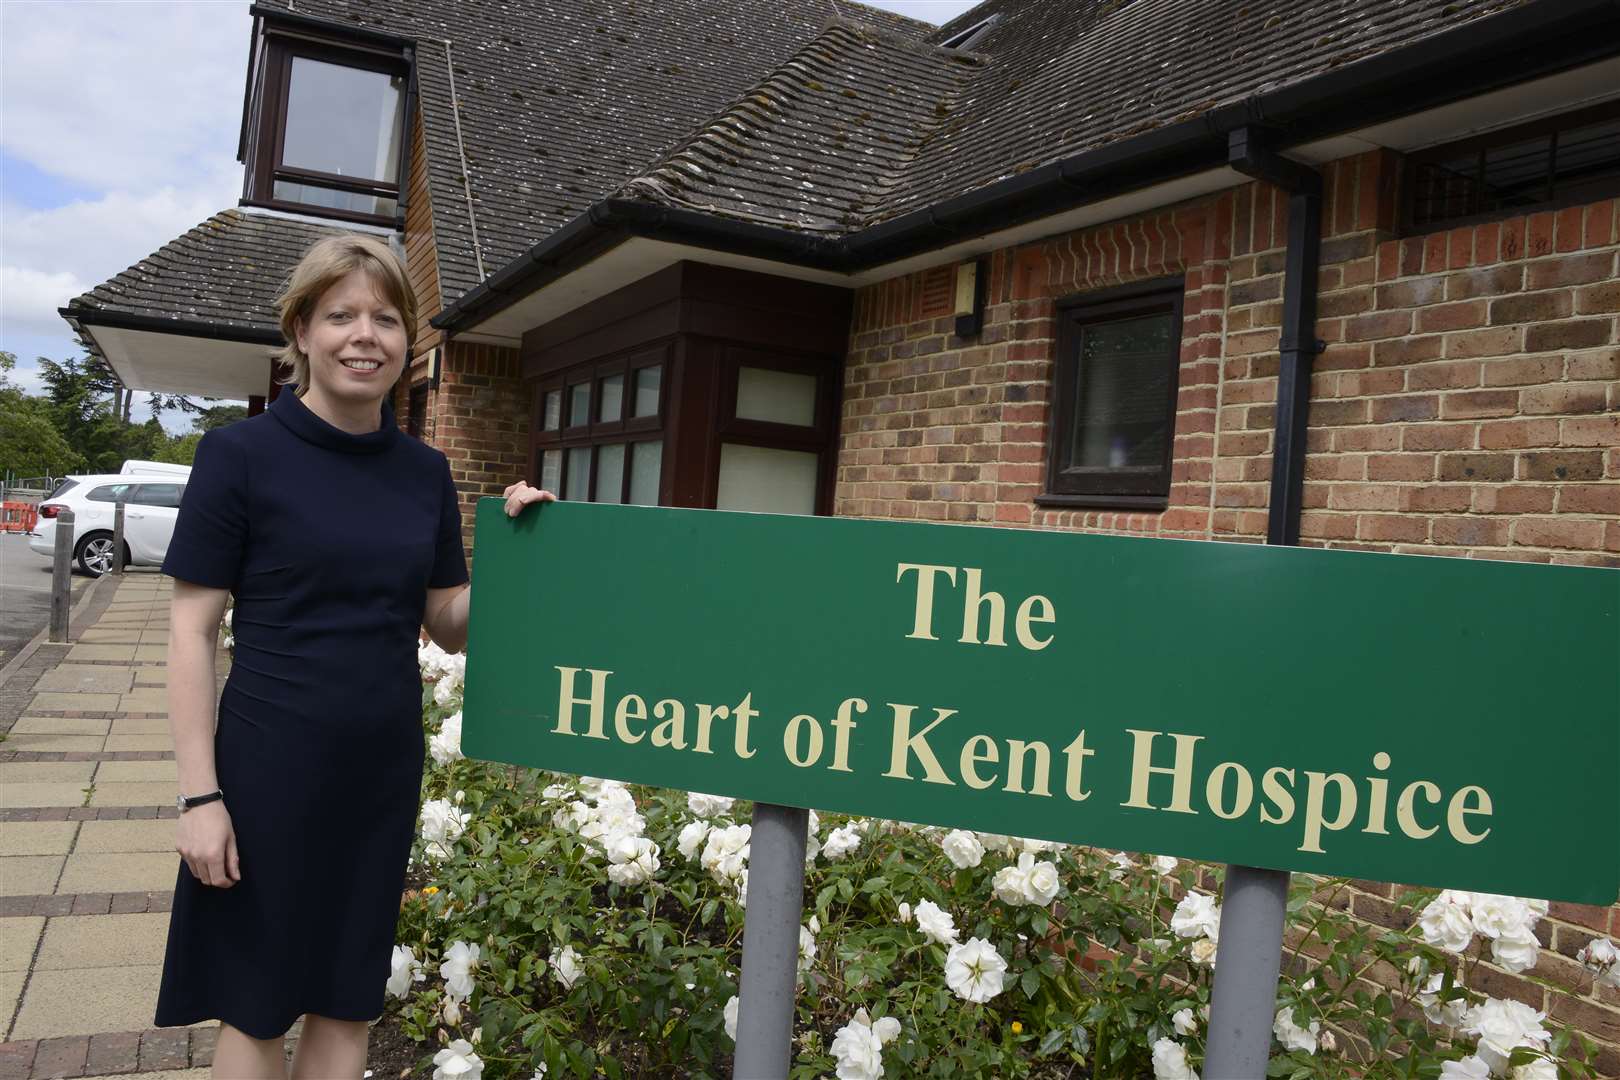 Chief executive of Heart of Kent Hospice, Sarah Pugh - Mrs Bonney said her aunt had a completely different experience at the hospice